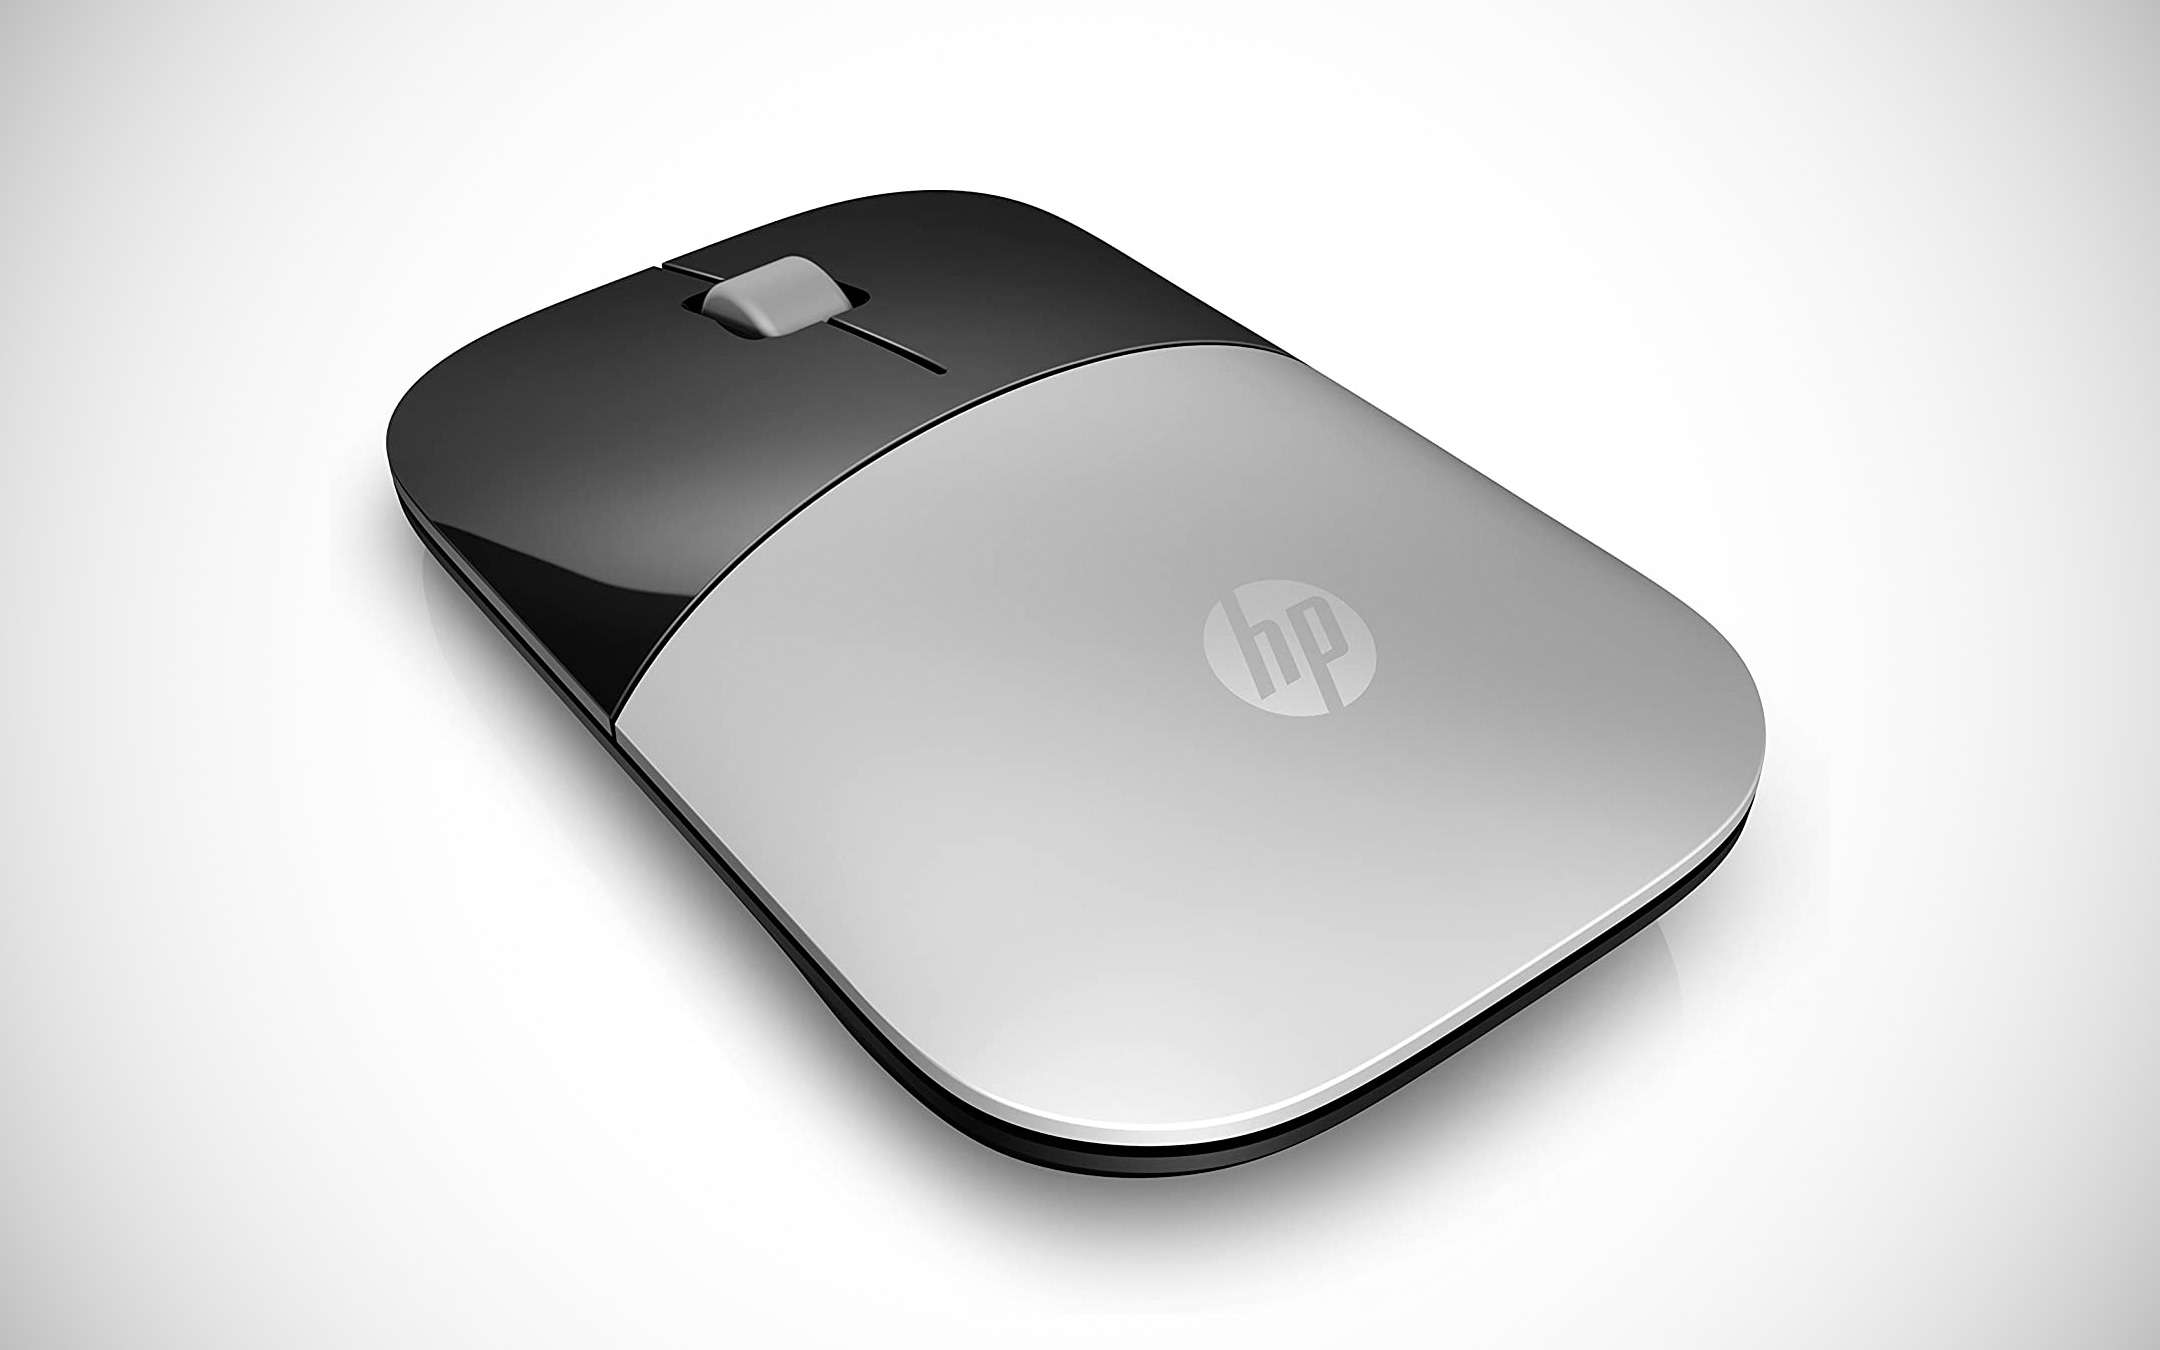 The HP Z3700 mouse on offer on Amazon at -30%